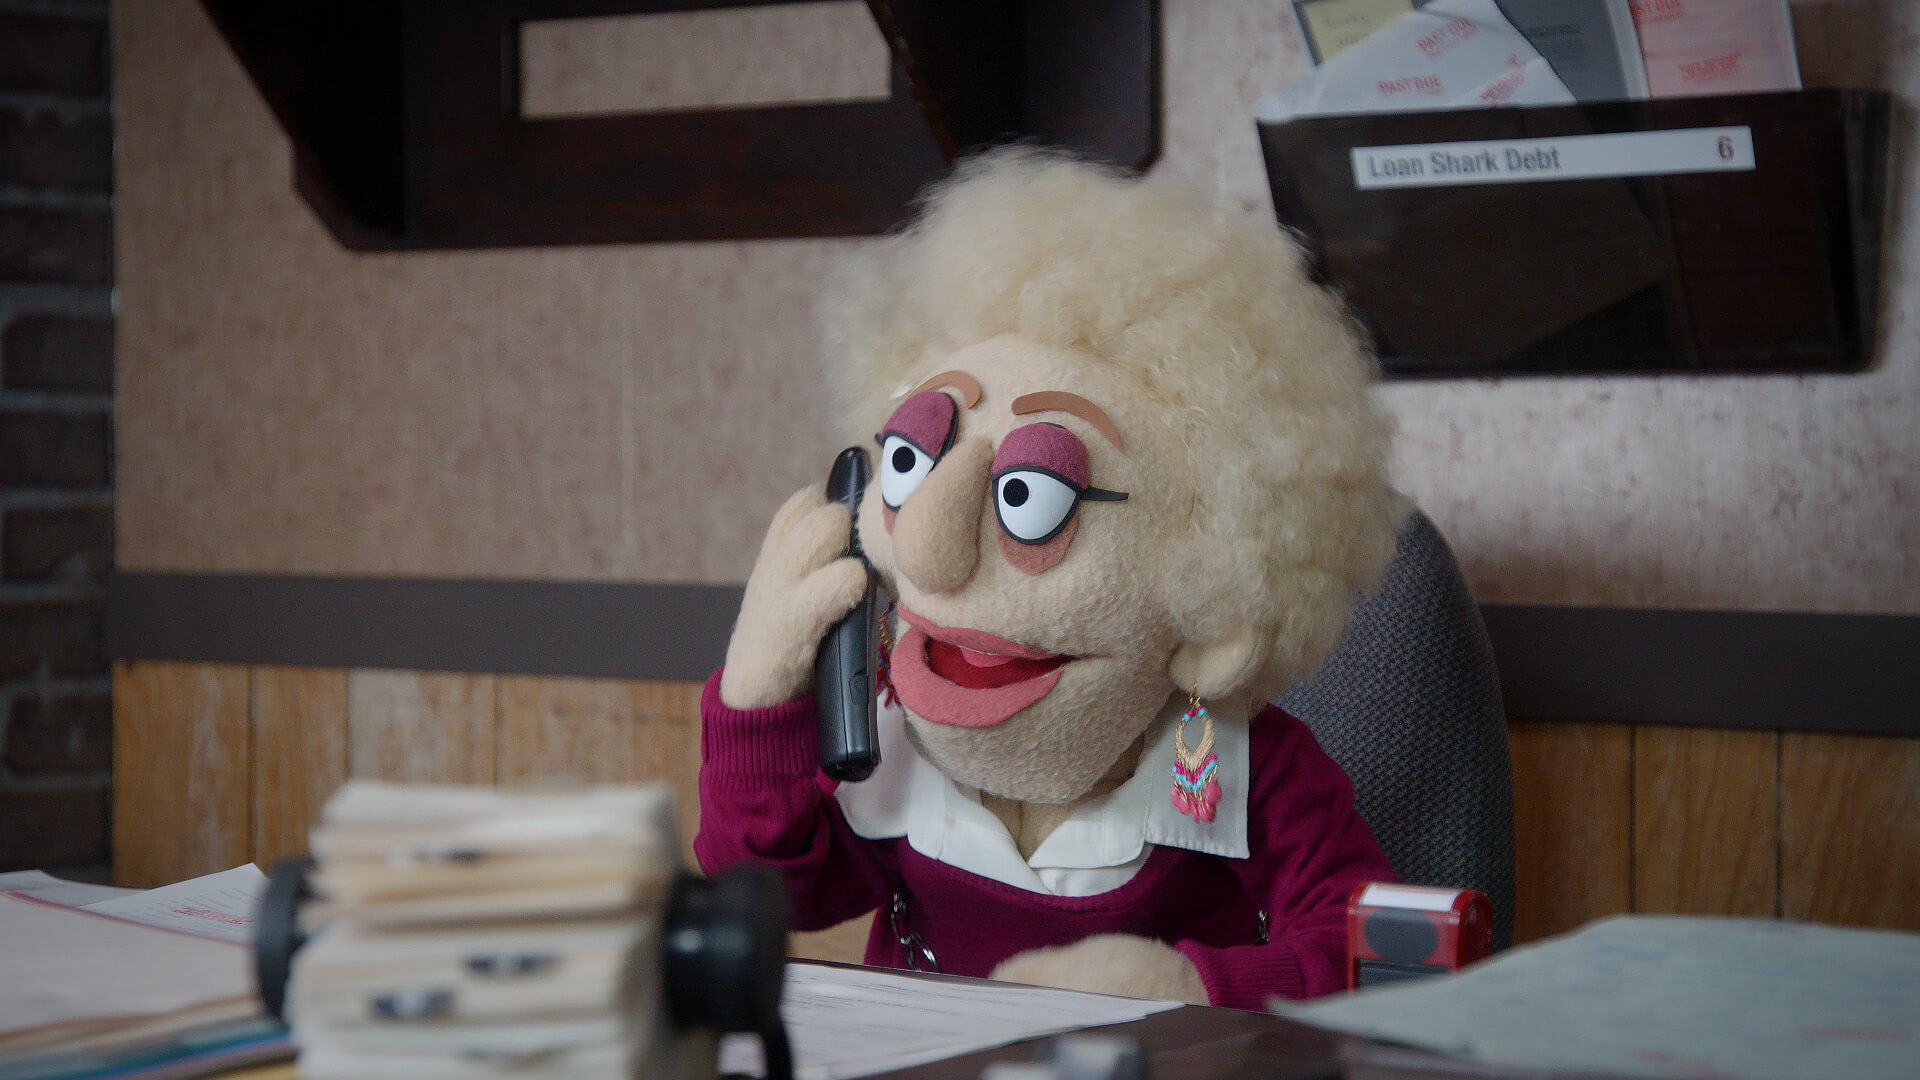 Female debt collector talks to Bobby Fletcher from a scene from Crank Yankers directed by Todd Bishop